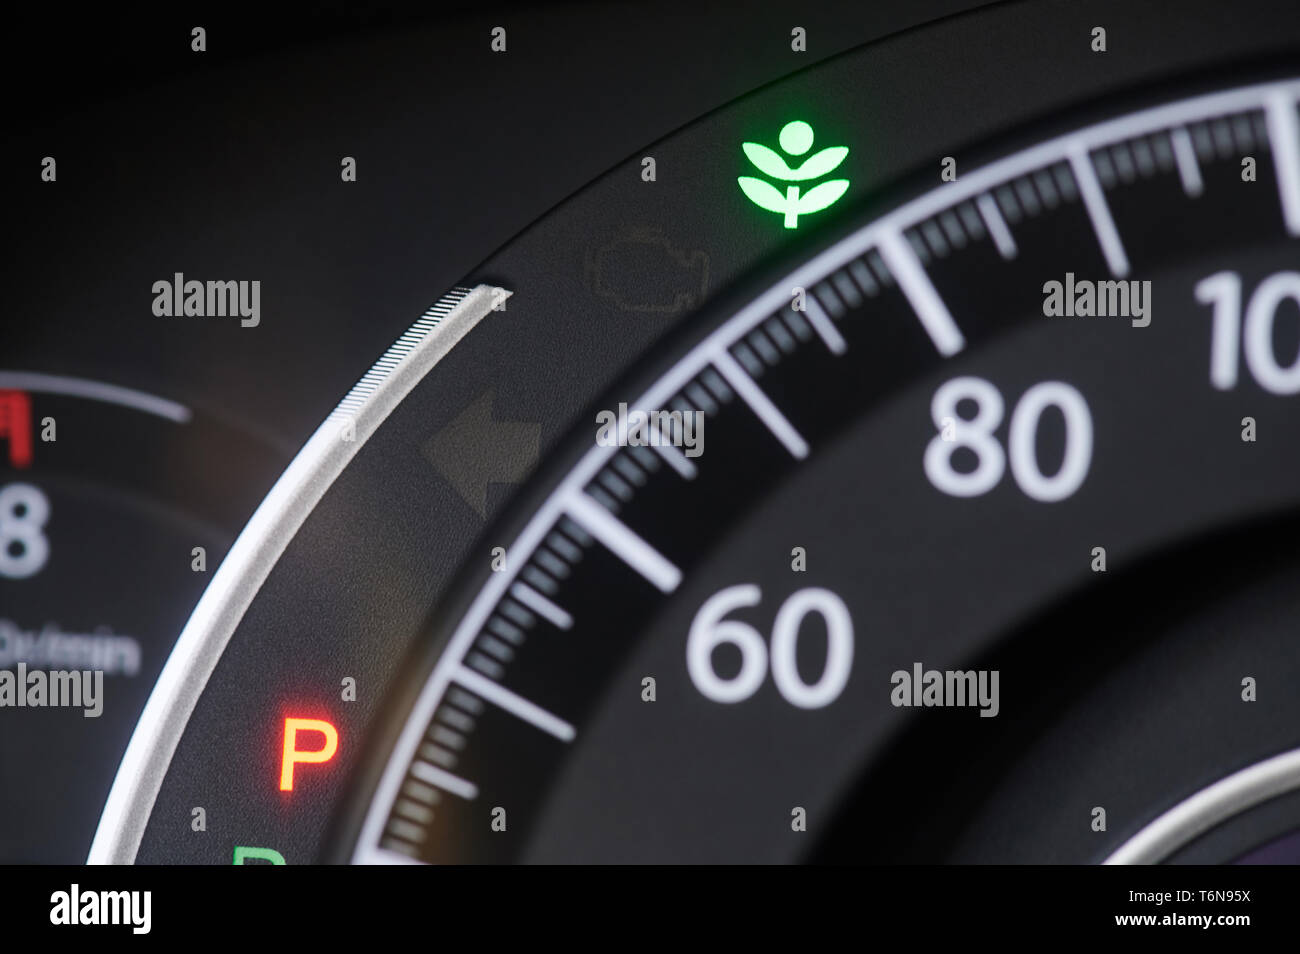 Eco sign on modern car dashboard close up view Stock Photo